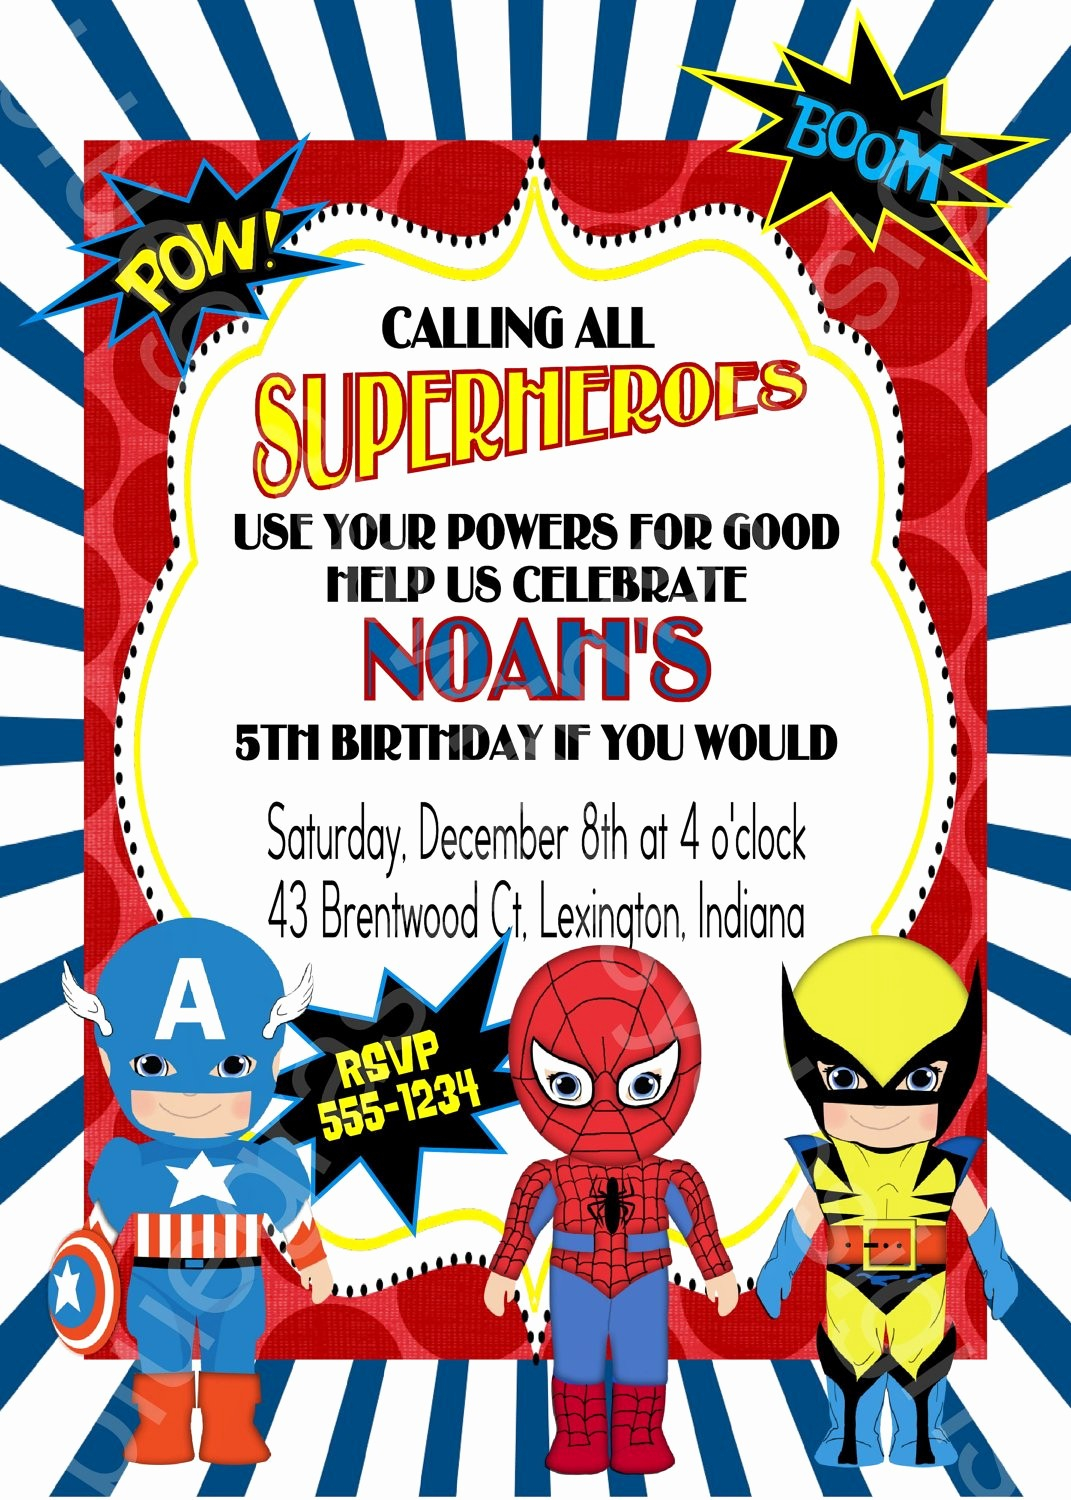 013 Superhero Invitation Template Free Ideas Awesome Calling All throughout proportions 1071 X 1500